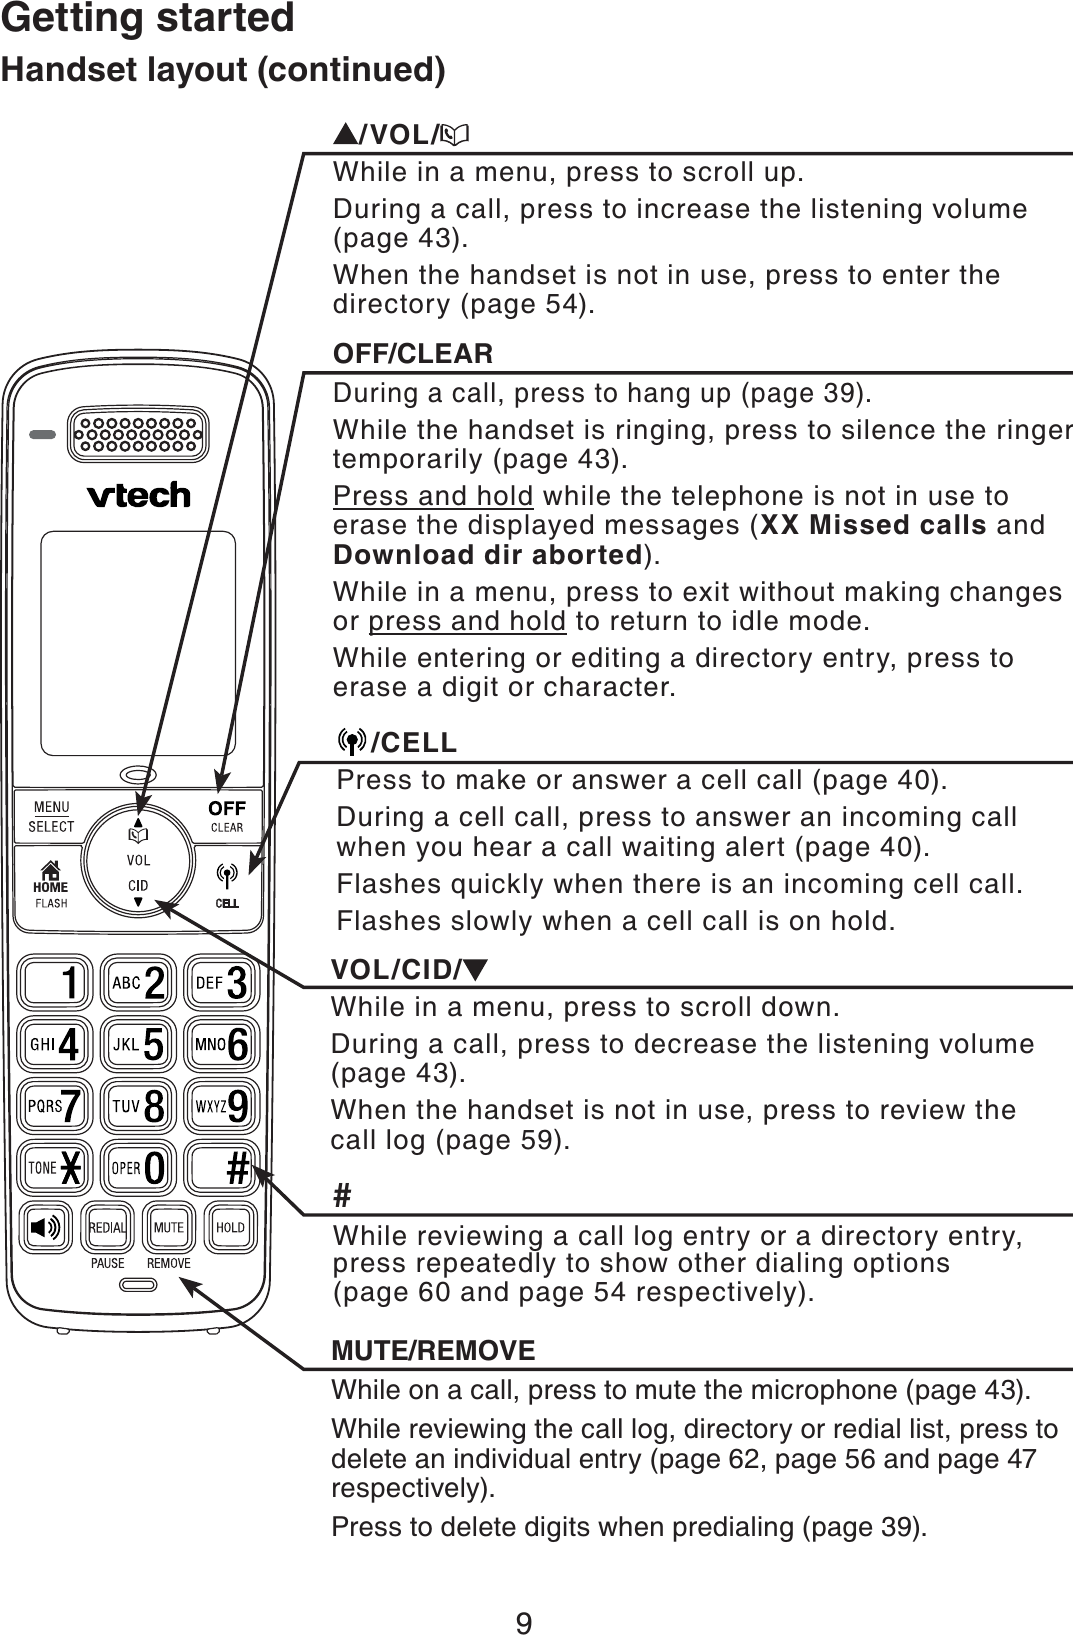 9Getting startedHandset layout (continued)VOL/CID/While in a menu, press to scroll down.During a call, press to decrease the listening volume (page 43).When the handset is not in use, press to review the call log (page 59).OFF/CLEARDuring a call, press to hang up (page 39).While the handset is ringing, press to silence the ringer temporarily (page 43).Press and hold while the telephone is not in use to erase the displayed messages (XX Missed calls and Download dir aborted).While in a menu, press to exit without making changes or press and hold to return to idle mode.While entering or editing a directory entry, press to erase a digit or character./VOL/While in a menu, press to scroll up.During a call, press to increase the listening volume (page 43).When the handset is not in use, press to enter the directory (page 54)./CELLPress to make or answer a cell call (page 40).During a cell call, press to answer an incoming call when you hear a call waiting alert (page 40).Flashes quickly when there is an incoming cell call. Flashes slowly when a cell call is on hold.#While reviewing a call log entry or a directory entry, press repeatedly to show other dialing options (page 60 and page 54 respectively).MUTE/REMOVEWhile on a call, press to mute the microphone (page 43).While reviewing the call log, directory or redial list, press to delete an individual entry (page 62, page 56 and page 47respectively).Press to delete digits when predialing (page 39).